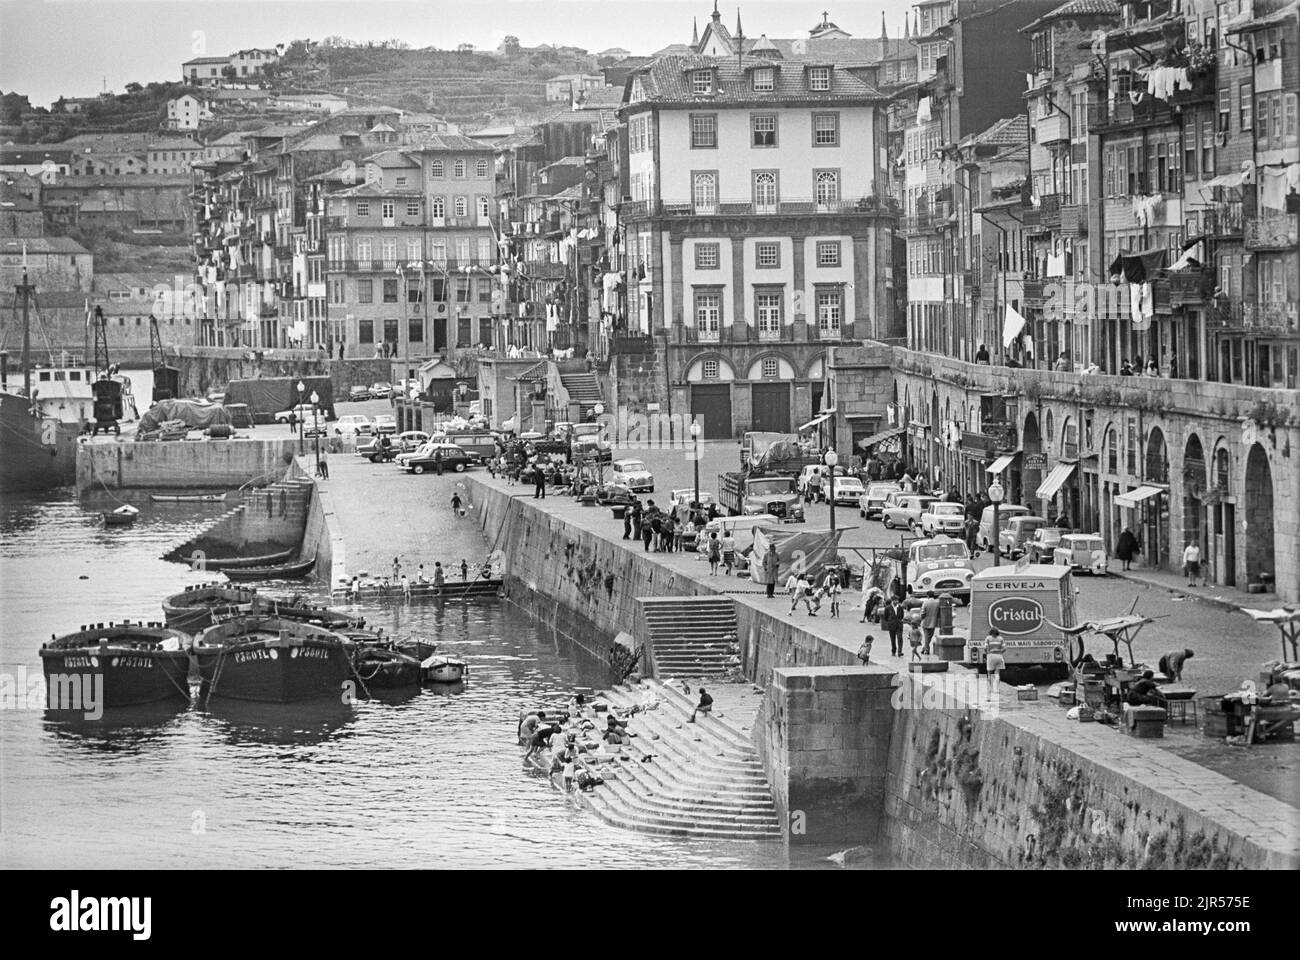 PORTUGAL - PORTO -  1970. Looking along the Cais da Ribeira and the river Douro waterfront in the Ribeira district of Porto, Northern Portugal.  Copyr Stock Photo